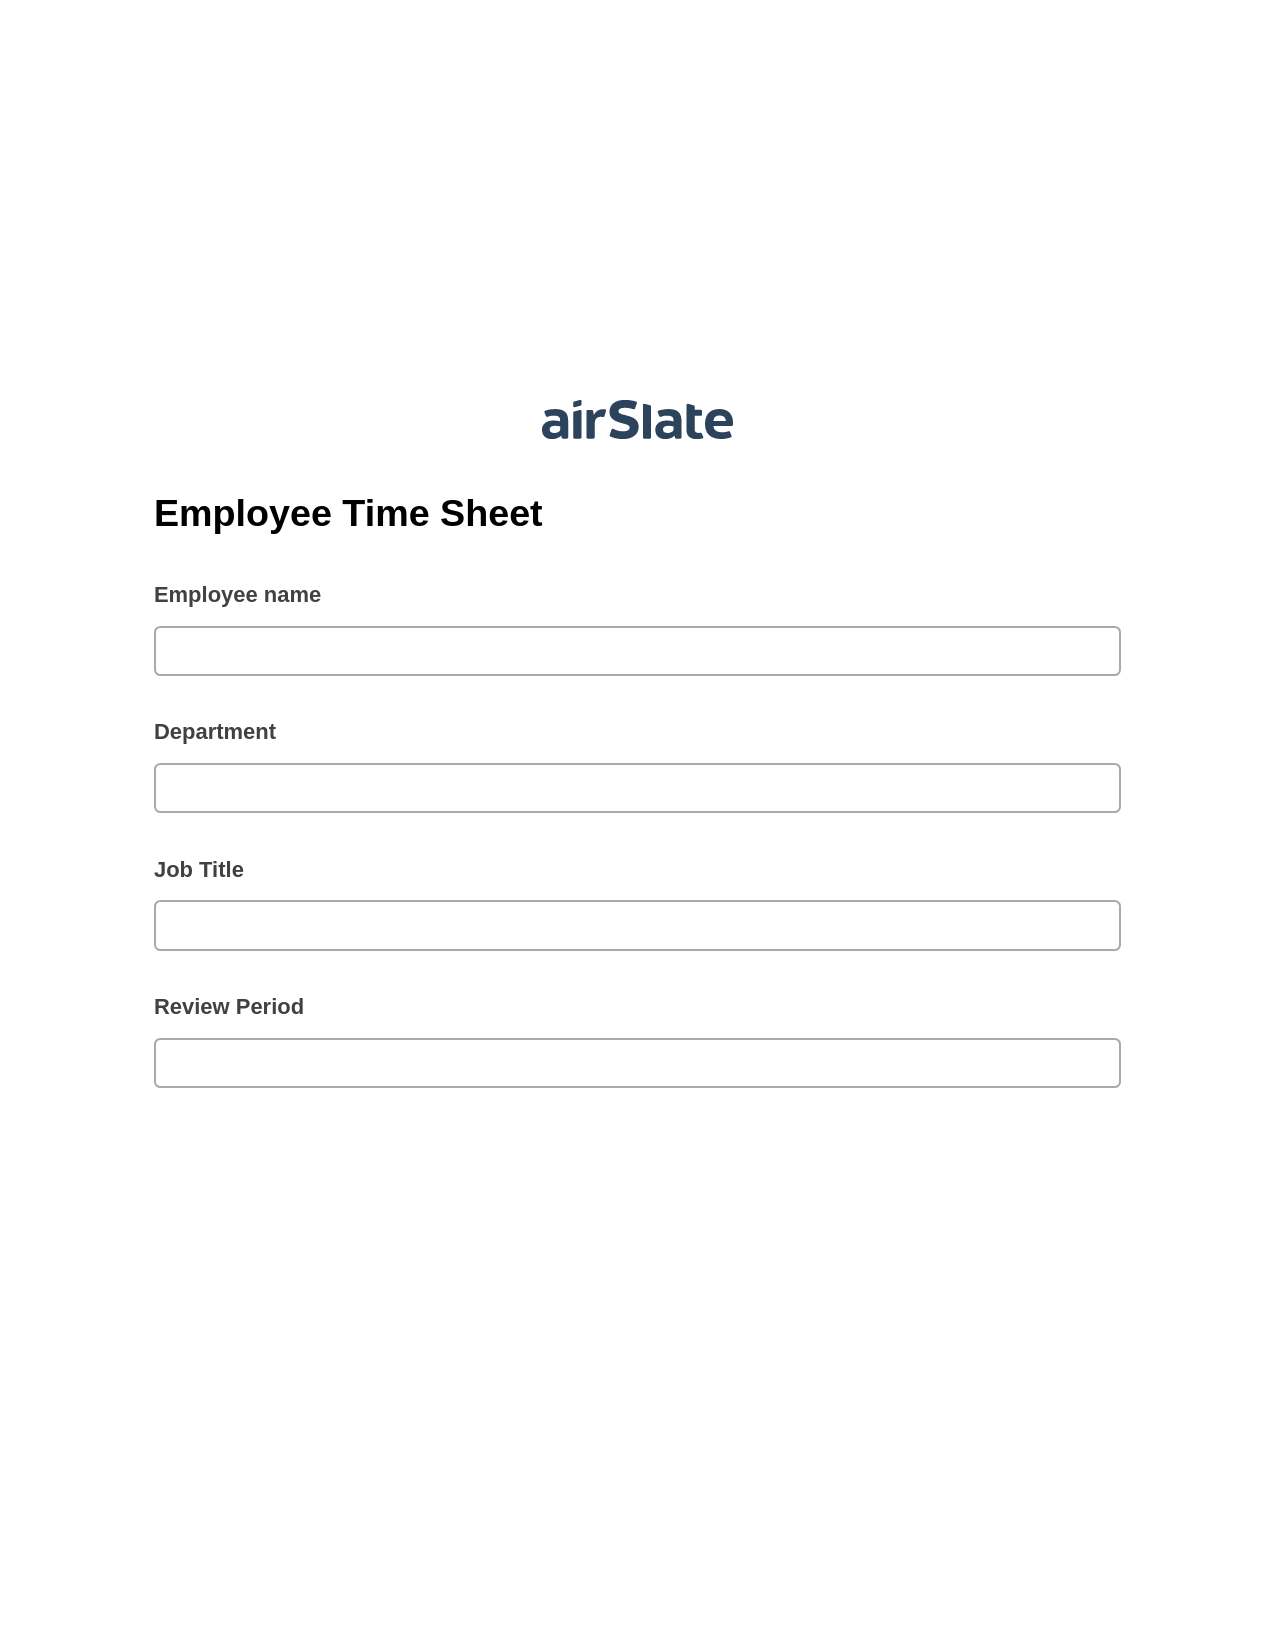 Employee Time Sheet Pre-fill Dropdowns from CSV file Bot, Create MS Dynamics 365 Records Bot, Export to NetSuite Bot